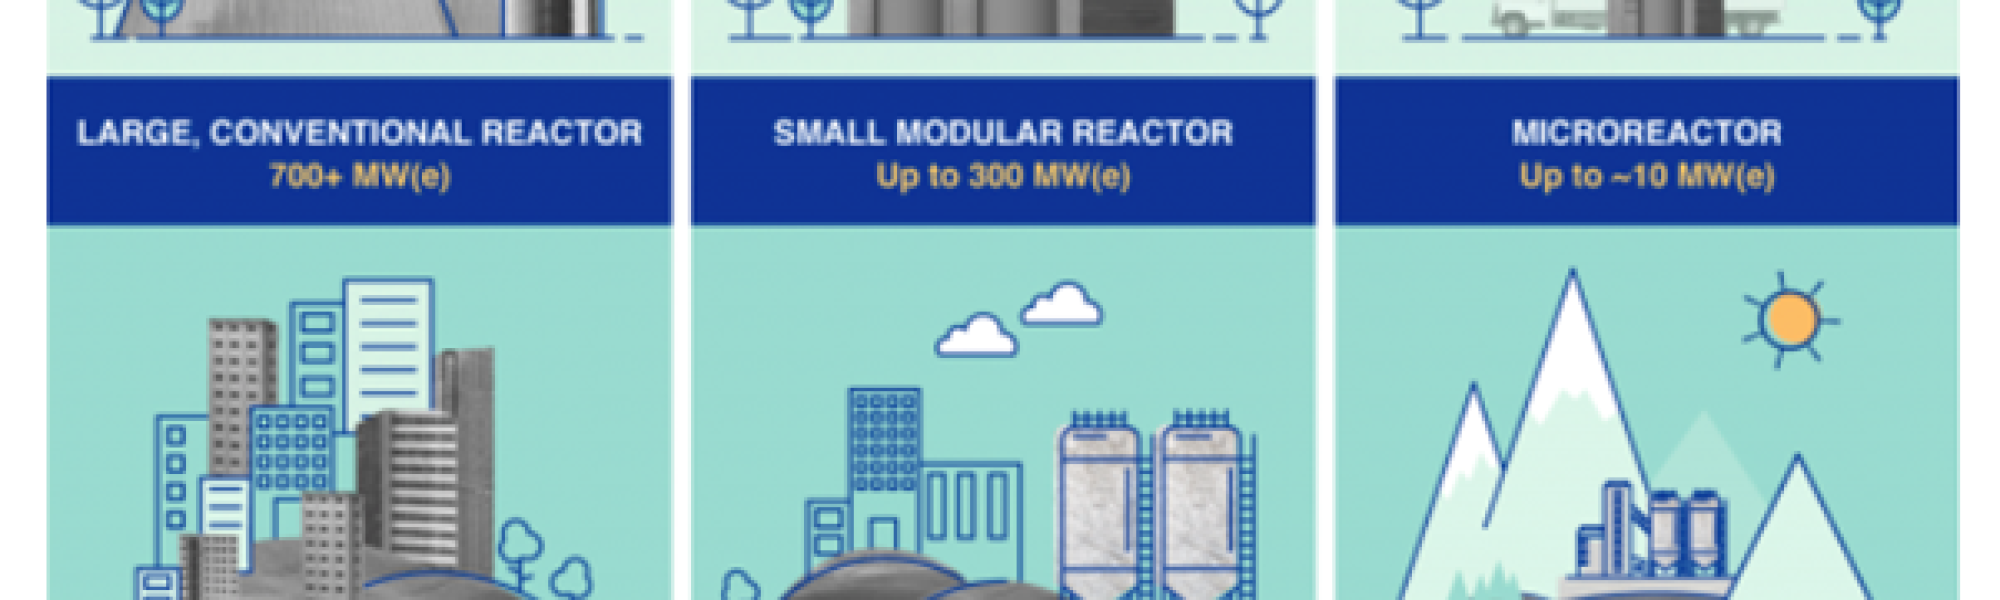 Small reactors could make nuclear energy big again. How do they work, and are they safe?